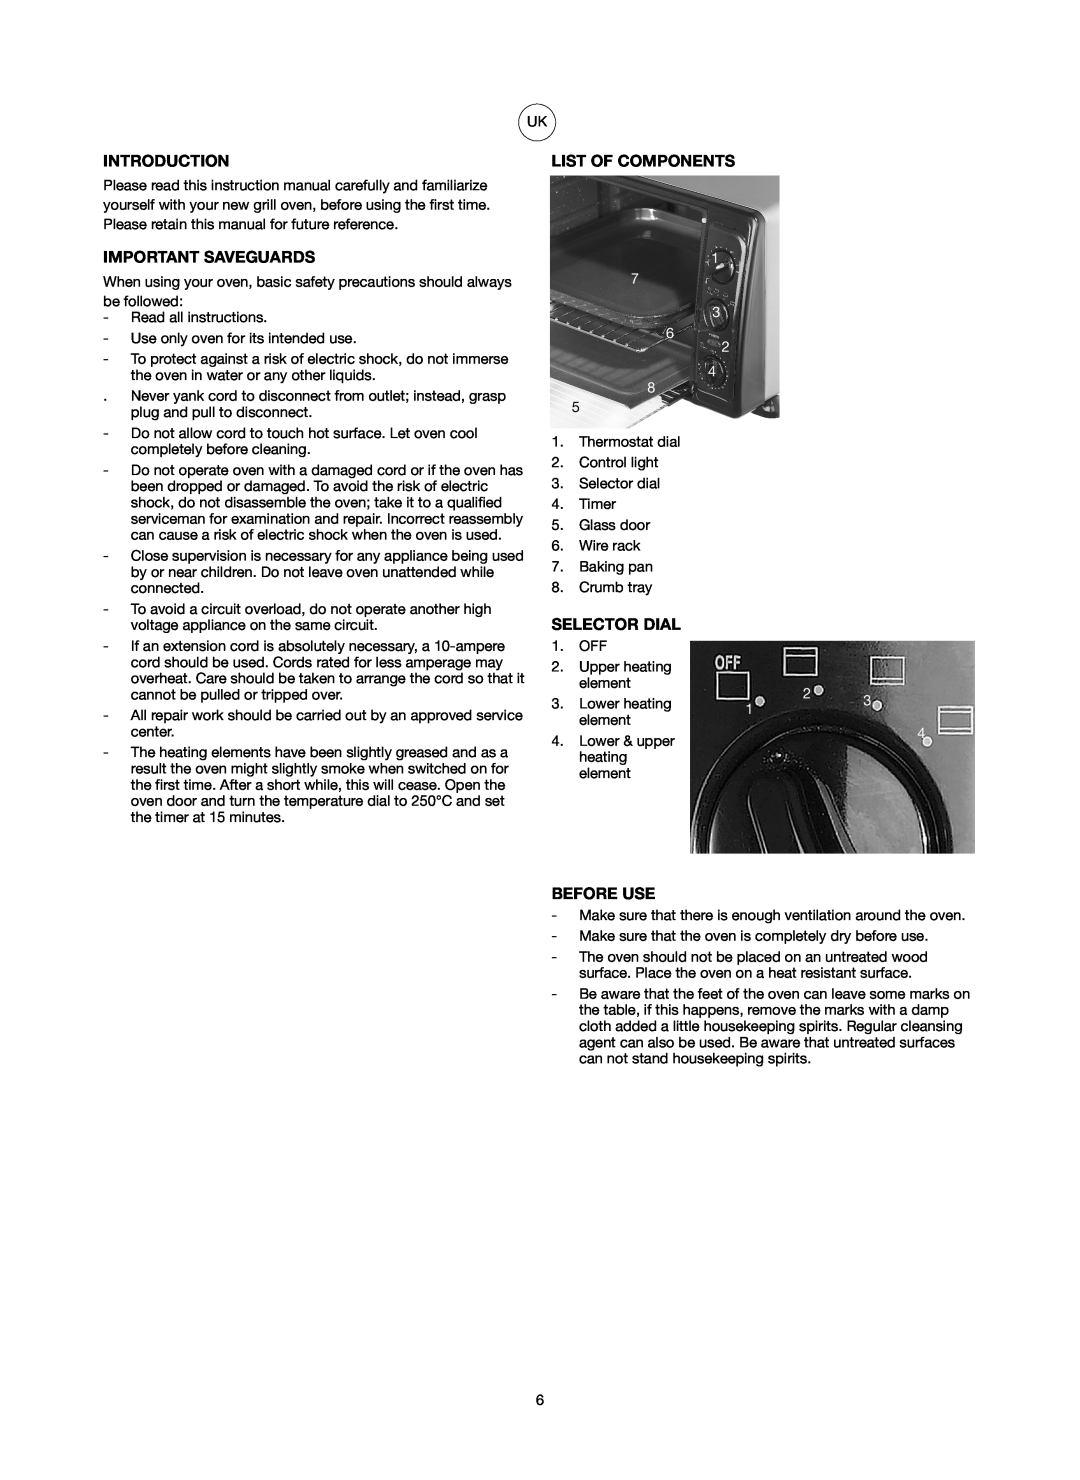 Melissa 751-082 manual Introduction, Important Saveguards, List Of Components, Selector Dial, Before Use 